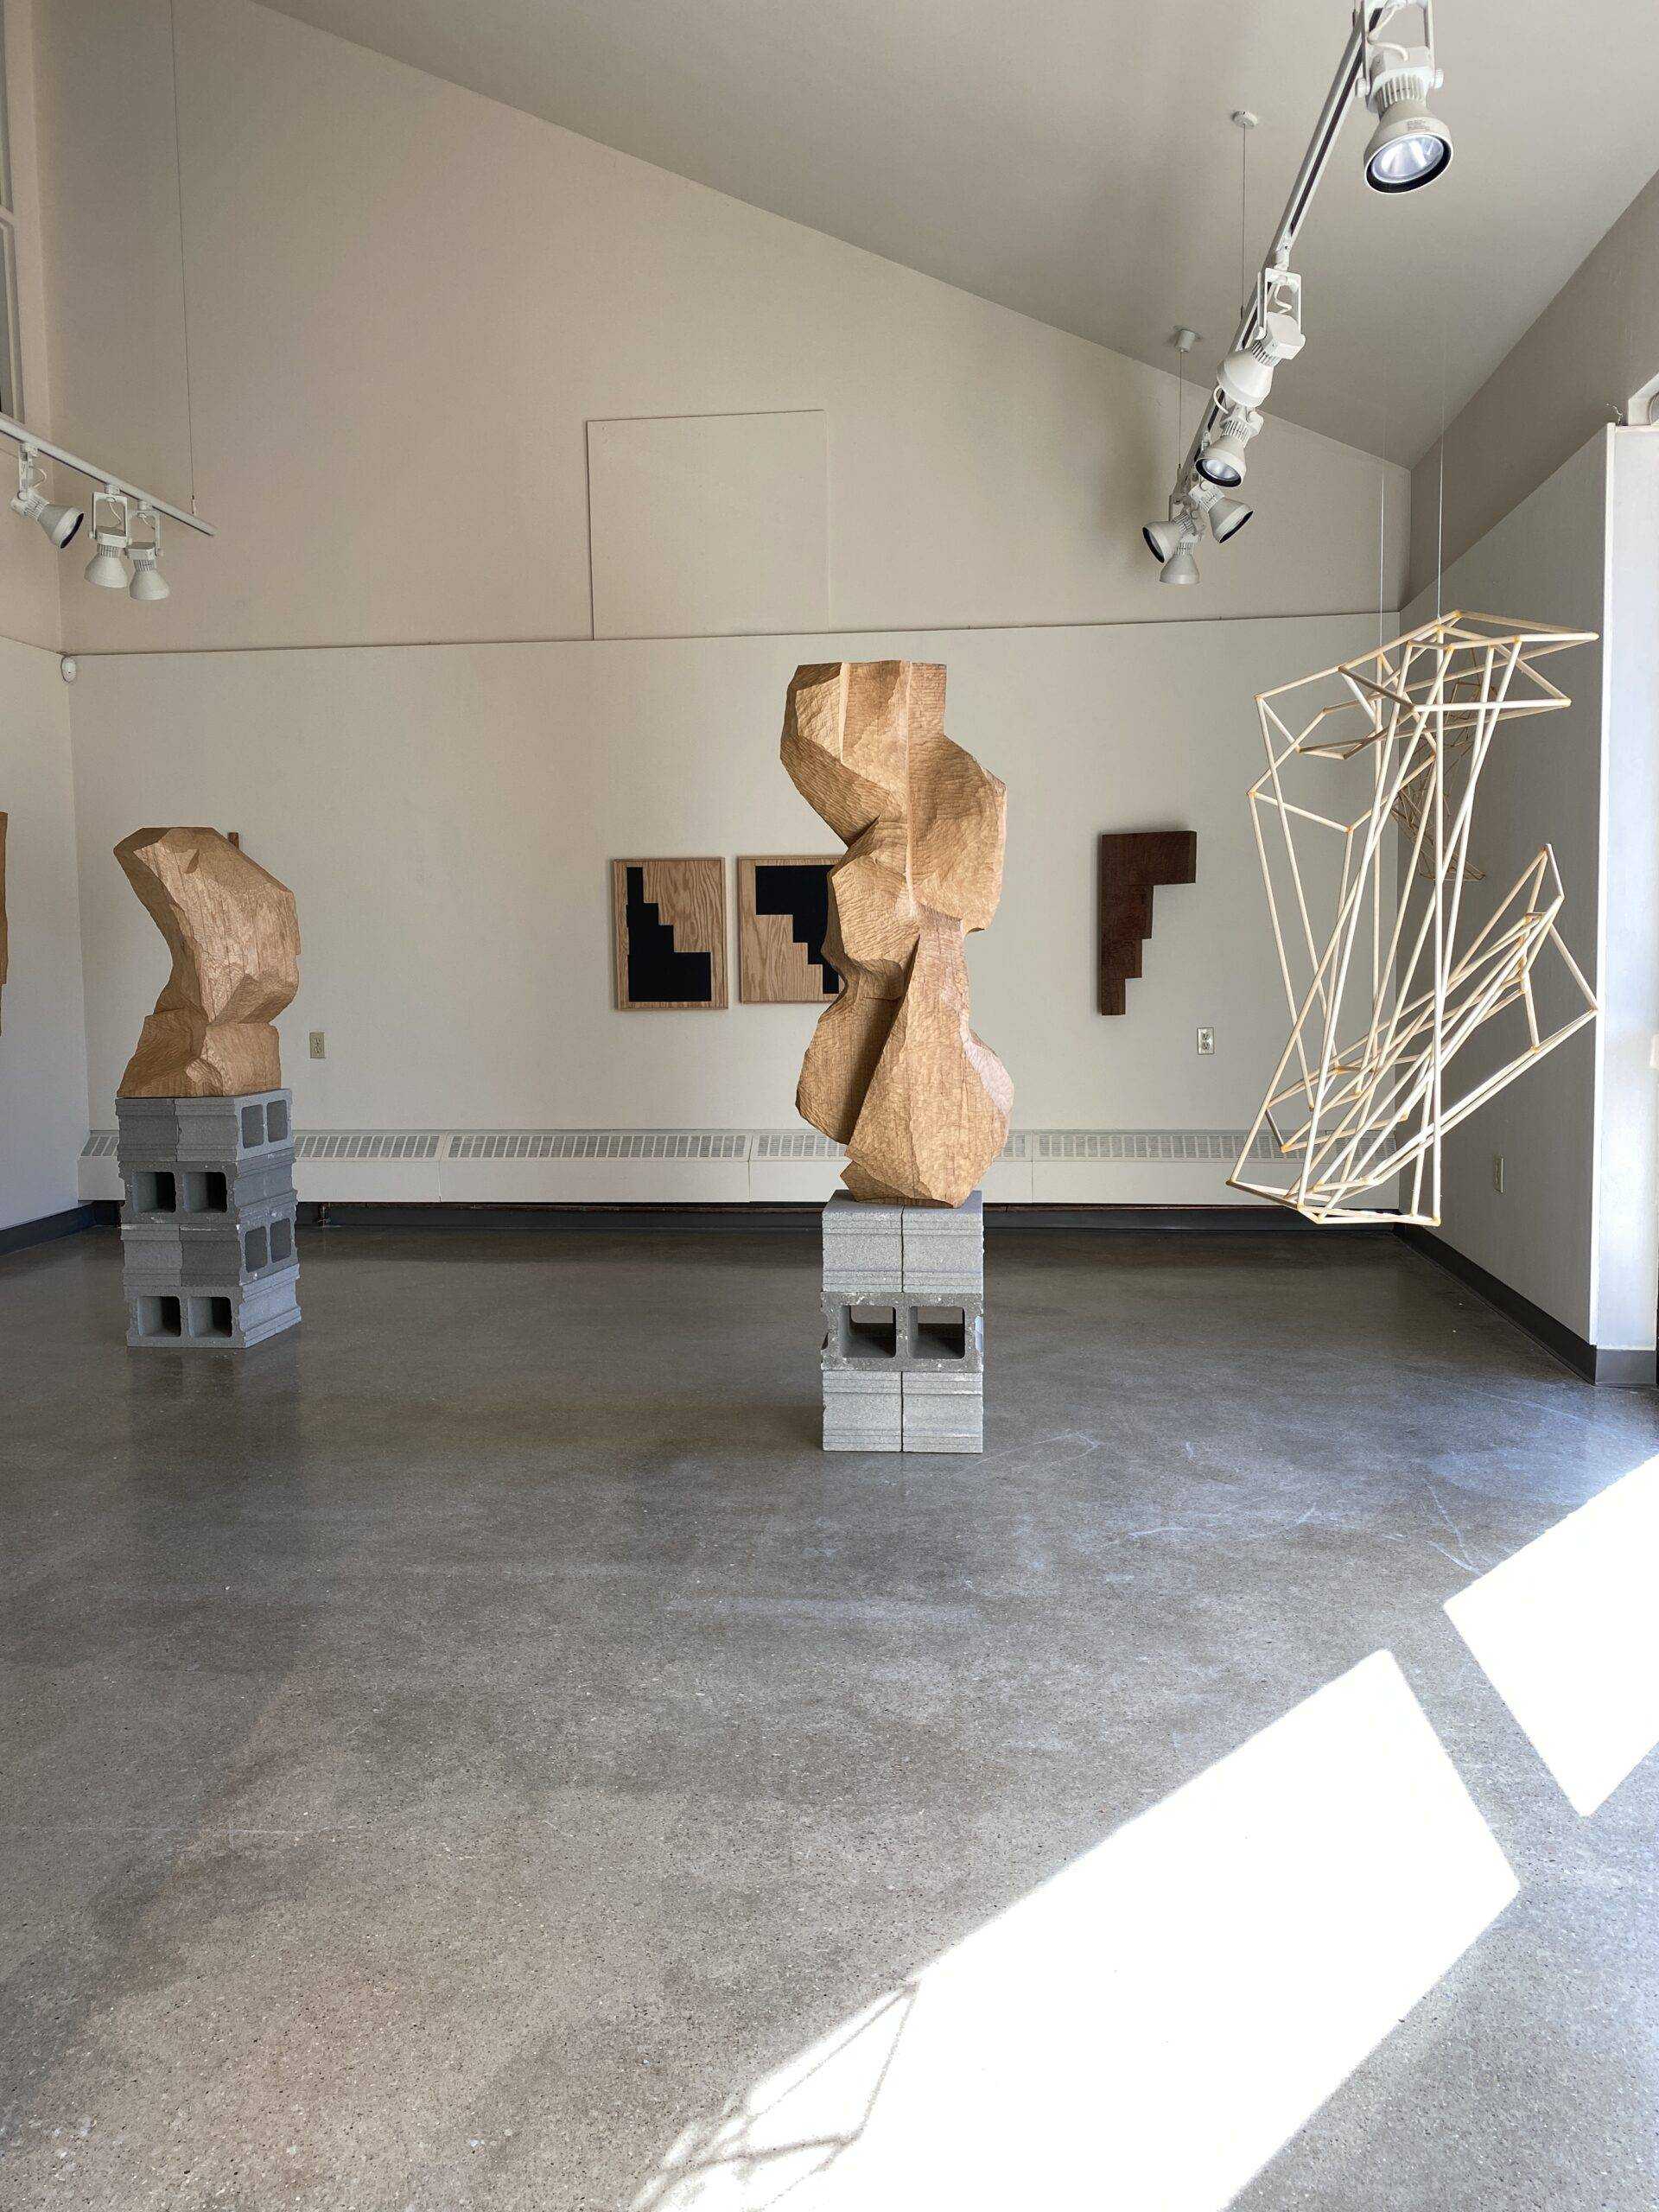 The Undetectable Presence by Mike Slaski on view in the artlab.